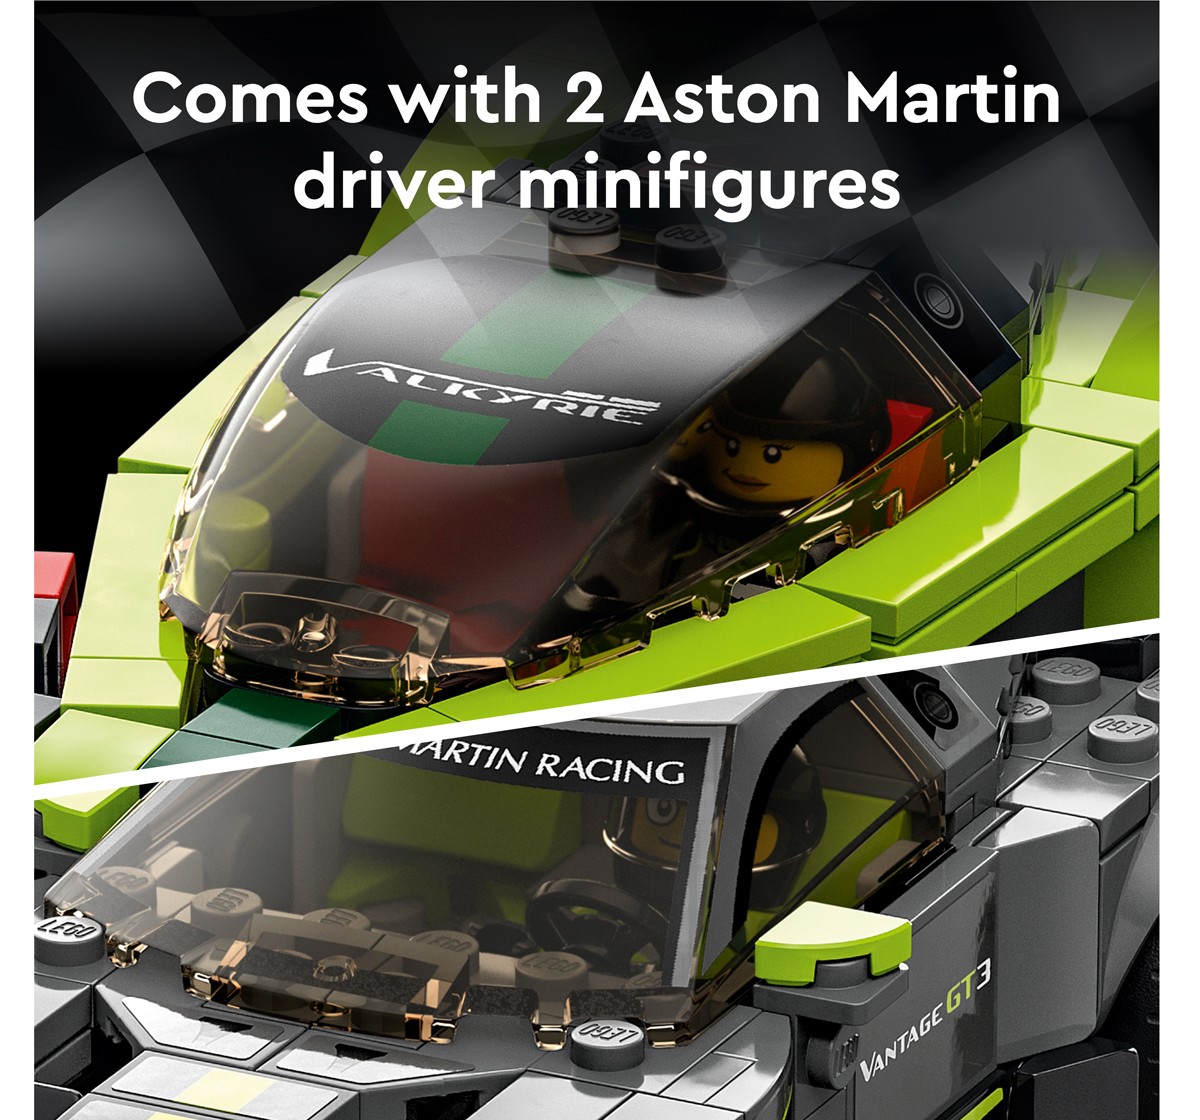 Speed Champions Aston Martin Valkyrie AMR Pro and Aston Martin Vantage GT3 Building Kit by Lego for Kids Aged 9 Years + (592 Pieces)